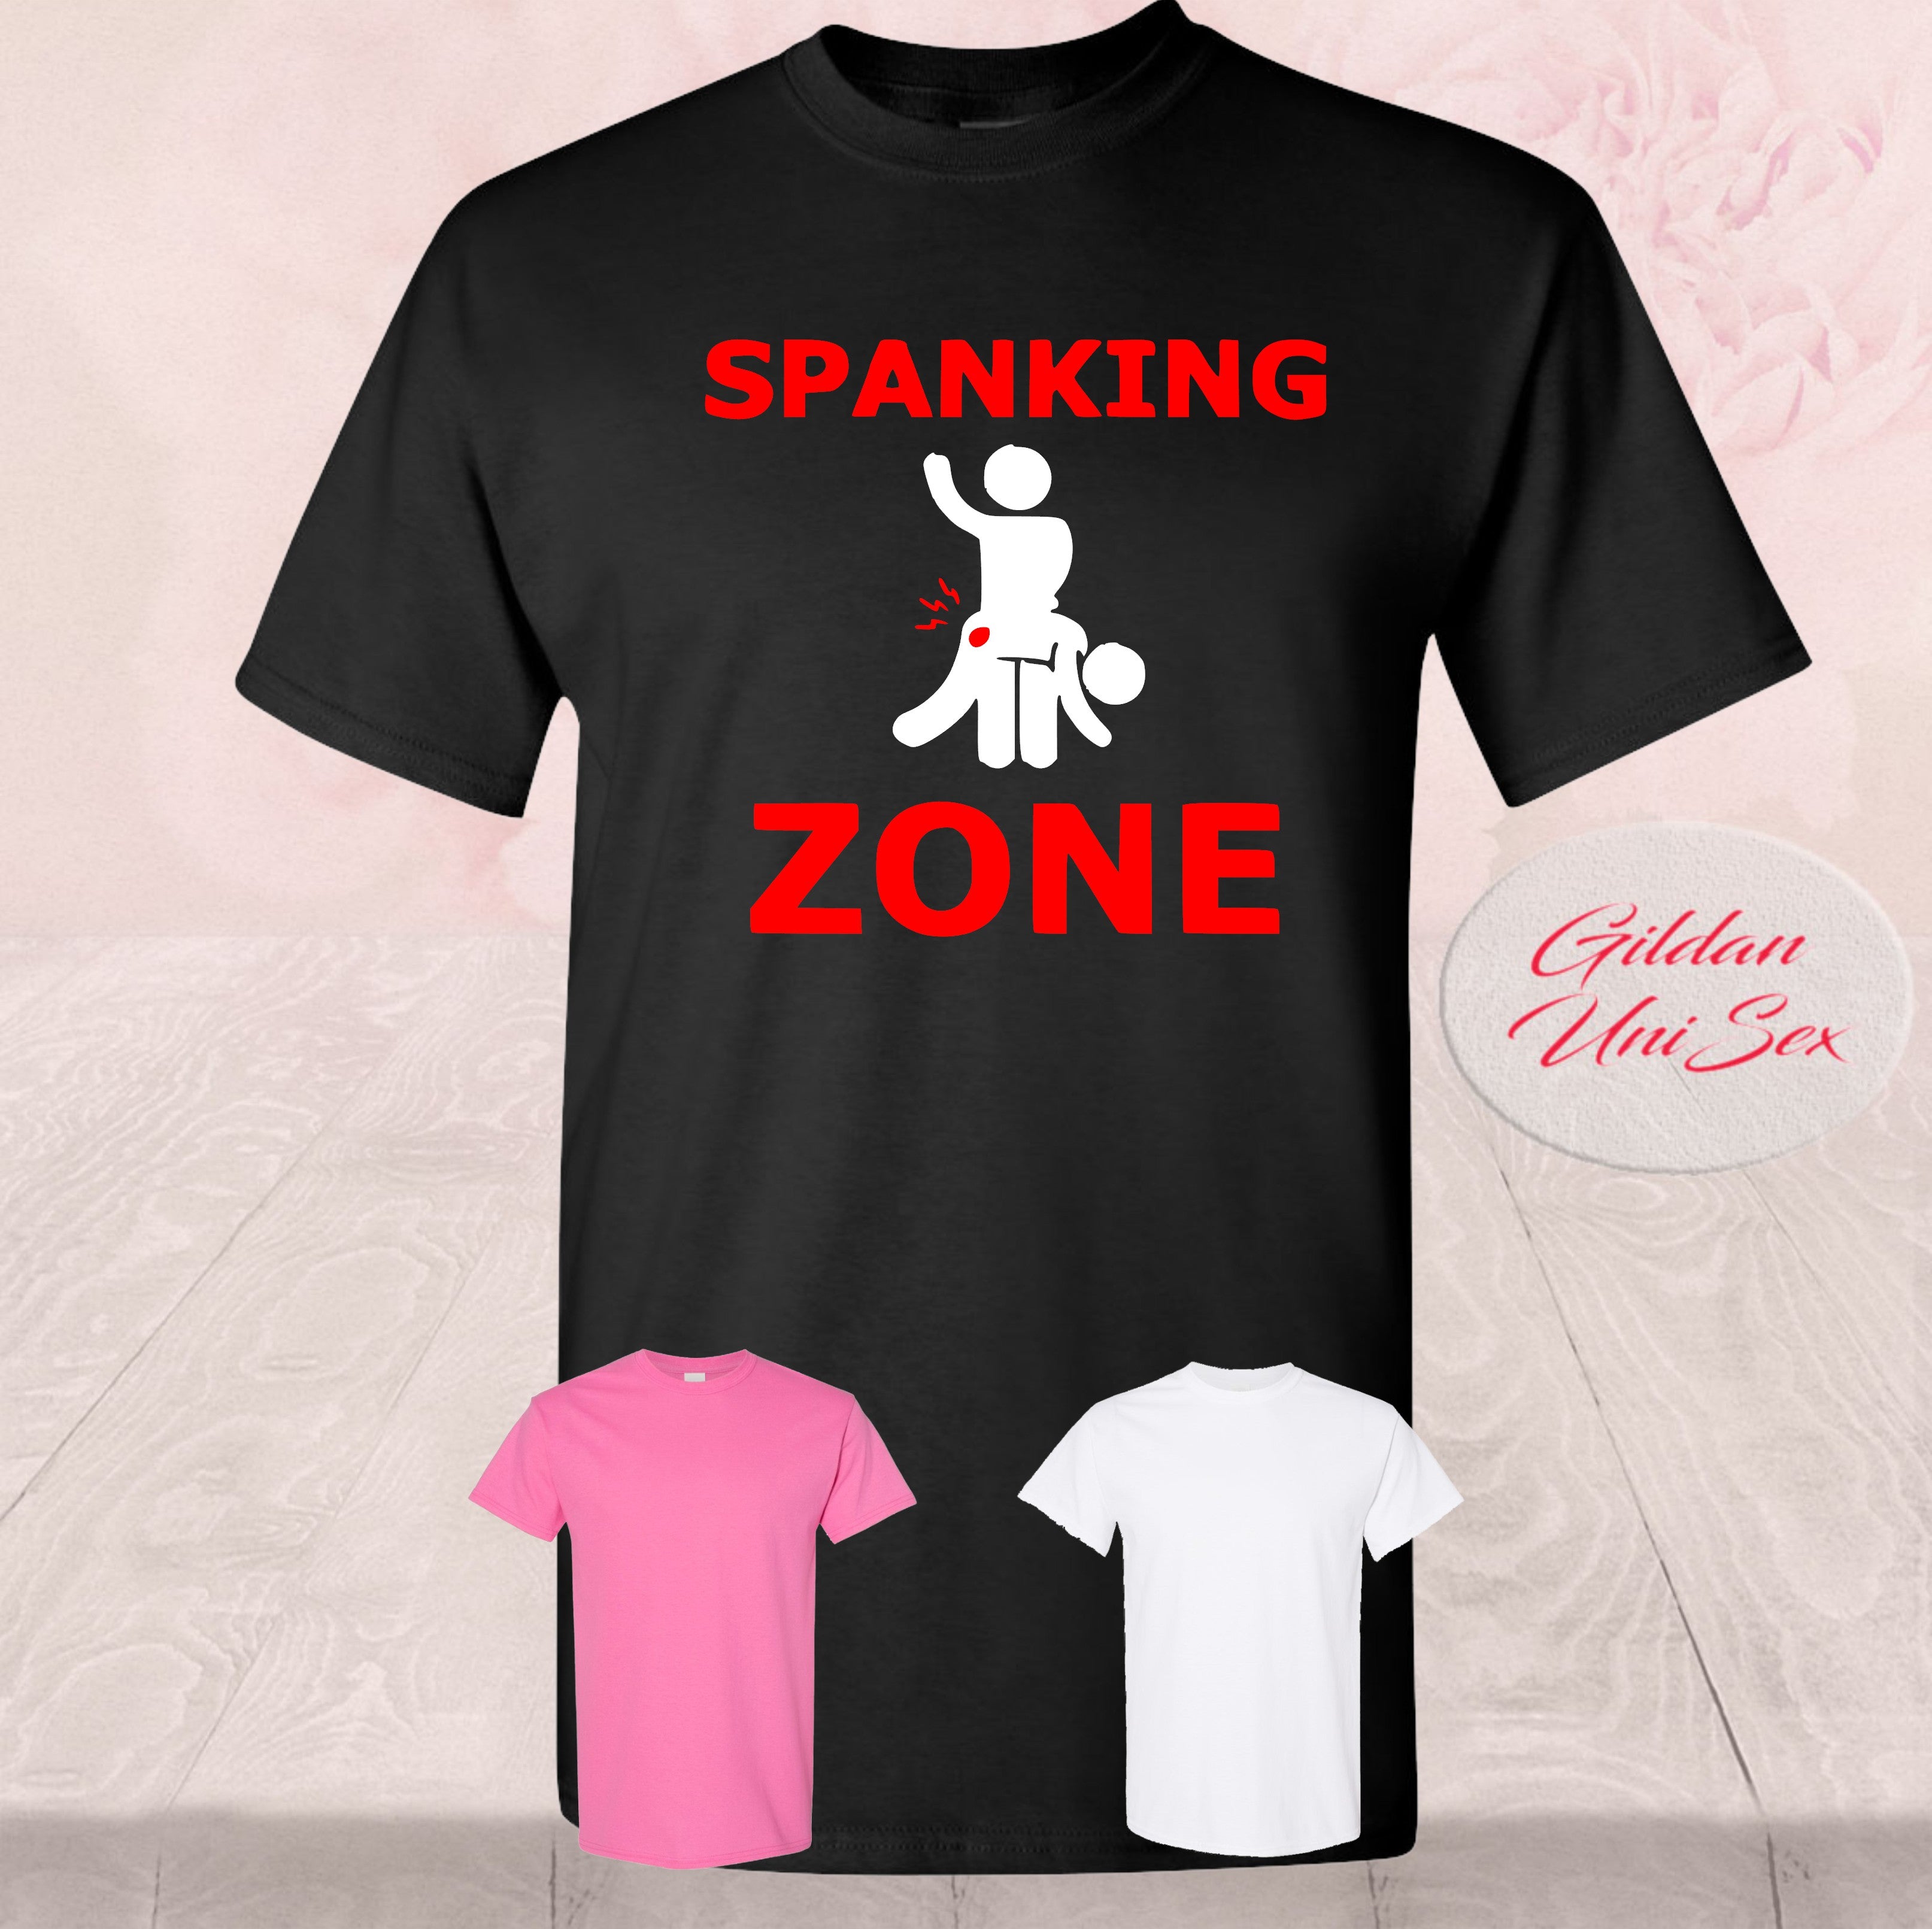 Spanking Zone, bend over the knee, Shirts Shop With photo